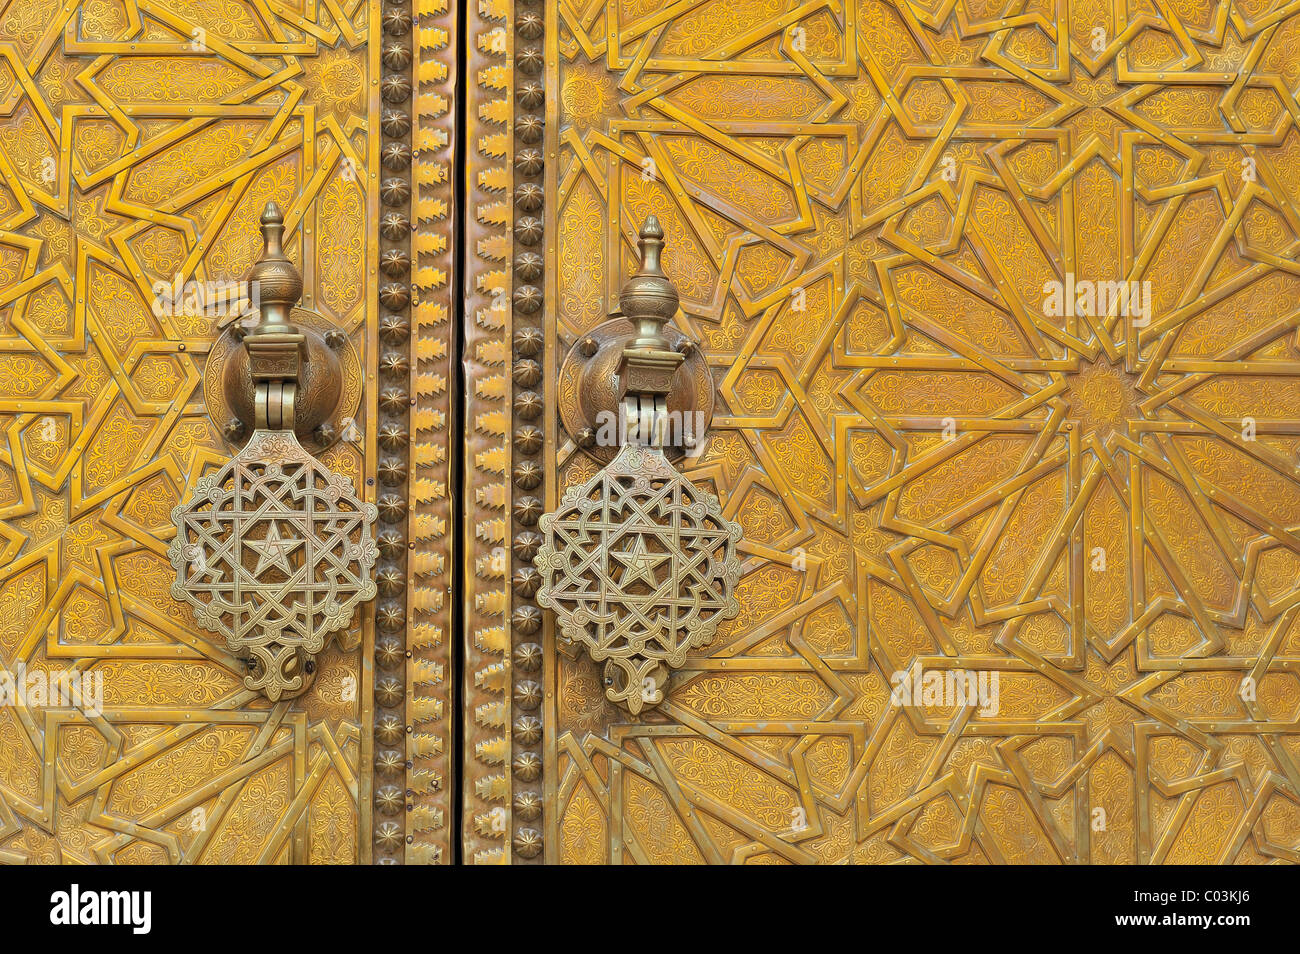 Detail, brass door knocker at the entrance to the Royal Palace, Dar el Makhzen, Fez, Morocco, Africa Stock Photo